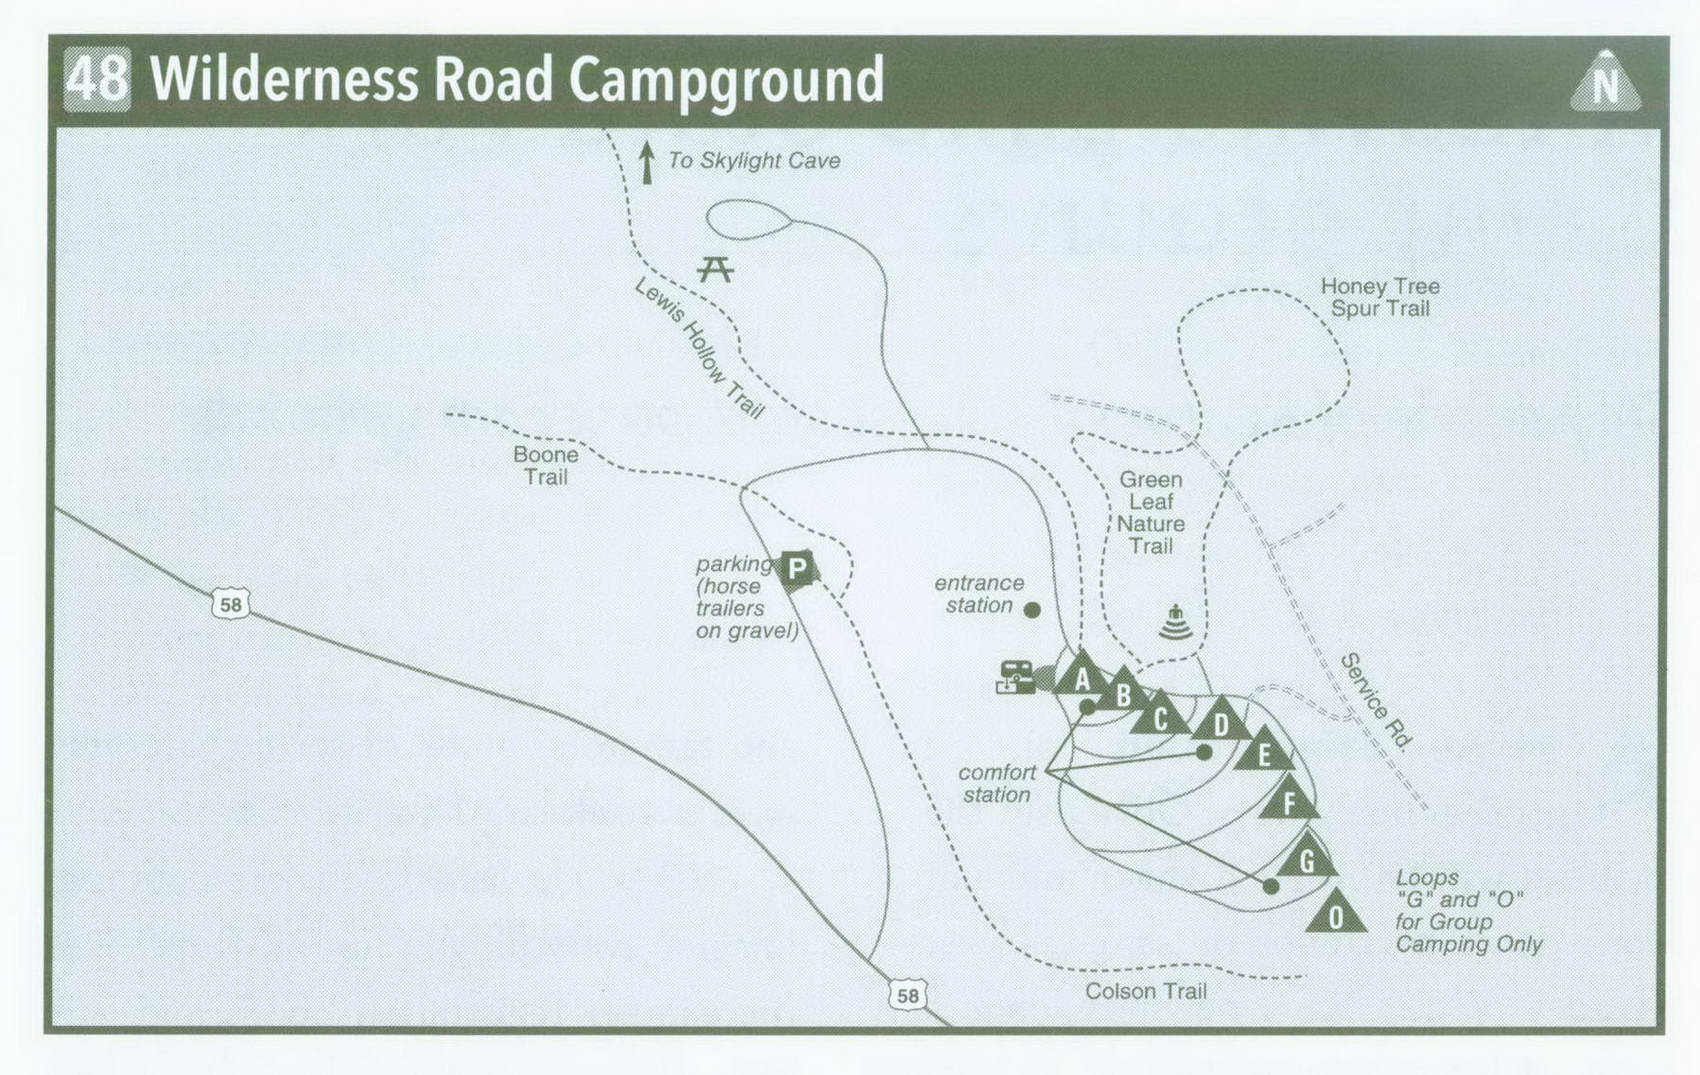 Plan of Wilderness Road Campground